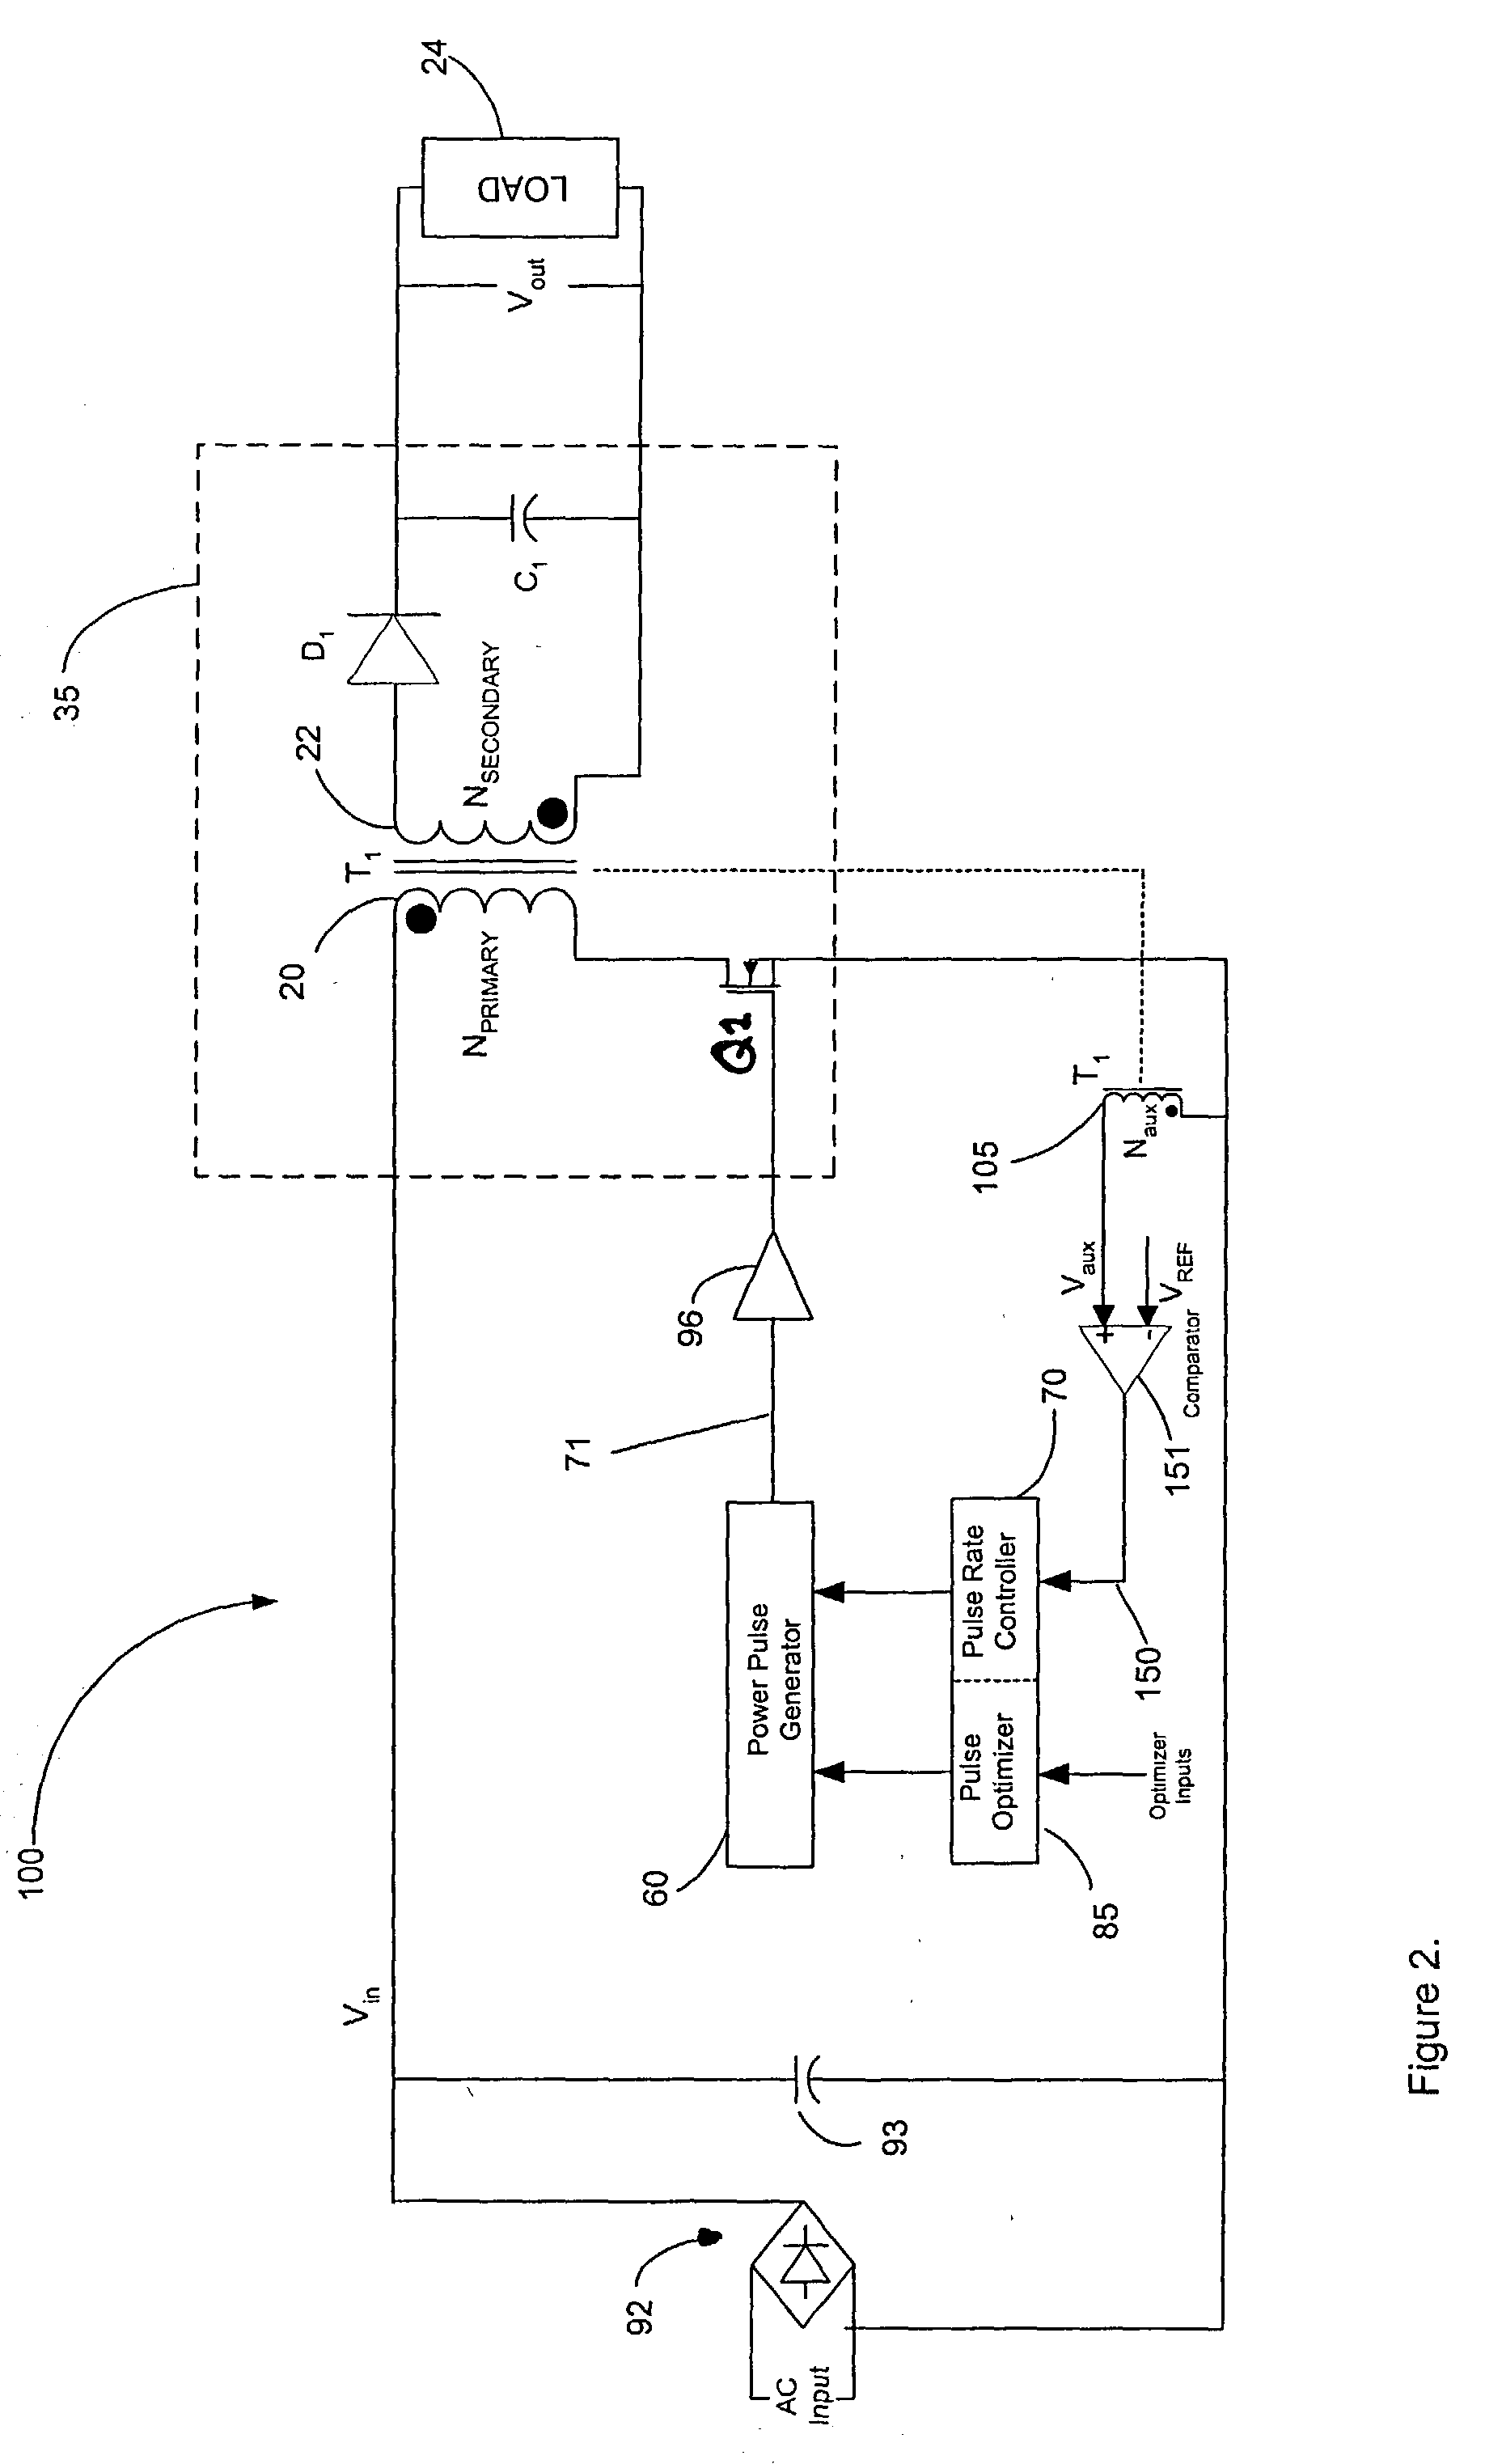 Methods for regulation of power converters using primary-only feedback